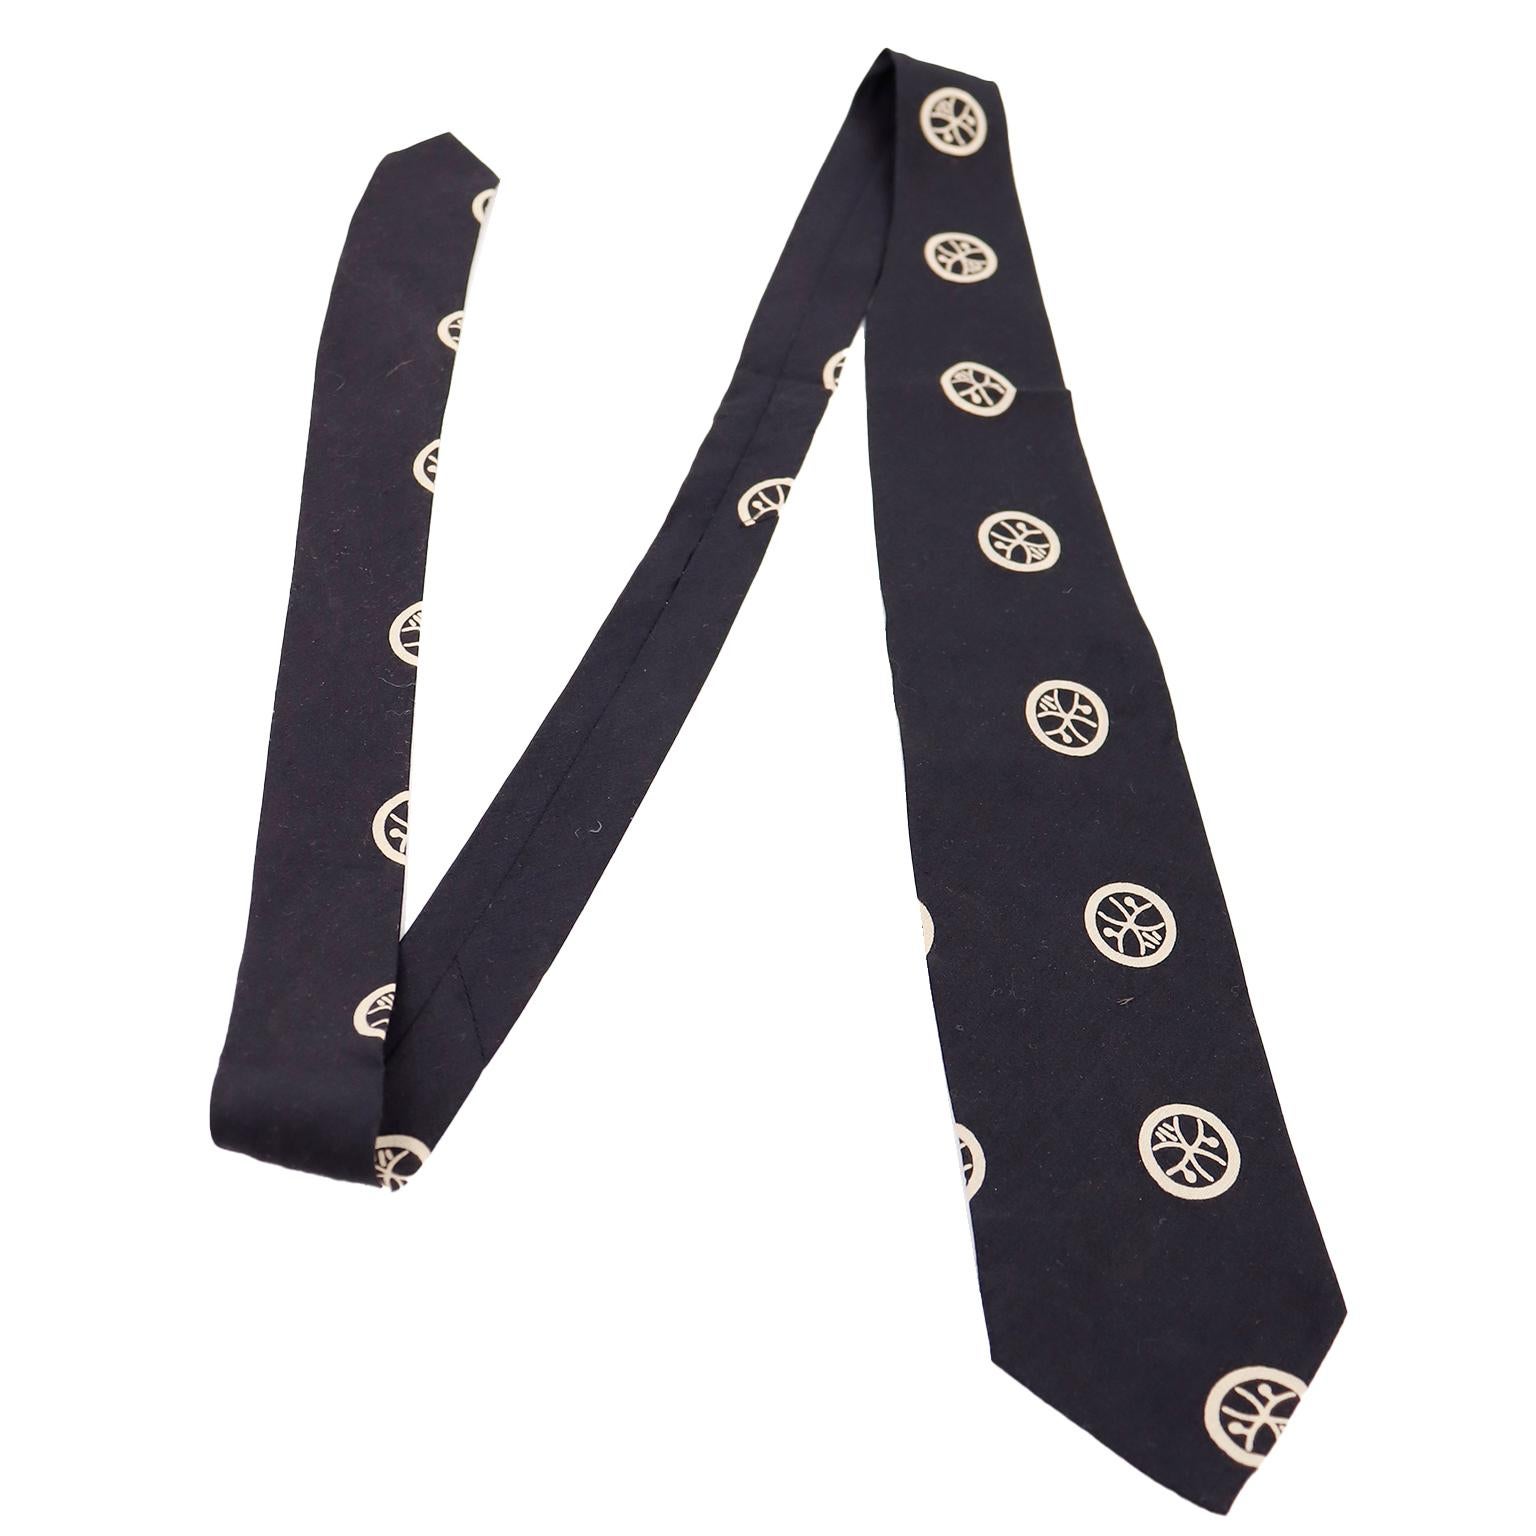 This vintage Yohji Yamamoto ultra fine silk  tie is so unique and we love the contrast of the white Japanese kamons against the black background. This tie is a rare design that came from an estate of Comme des Garcons and Yohji Yamamoto men's